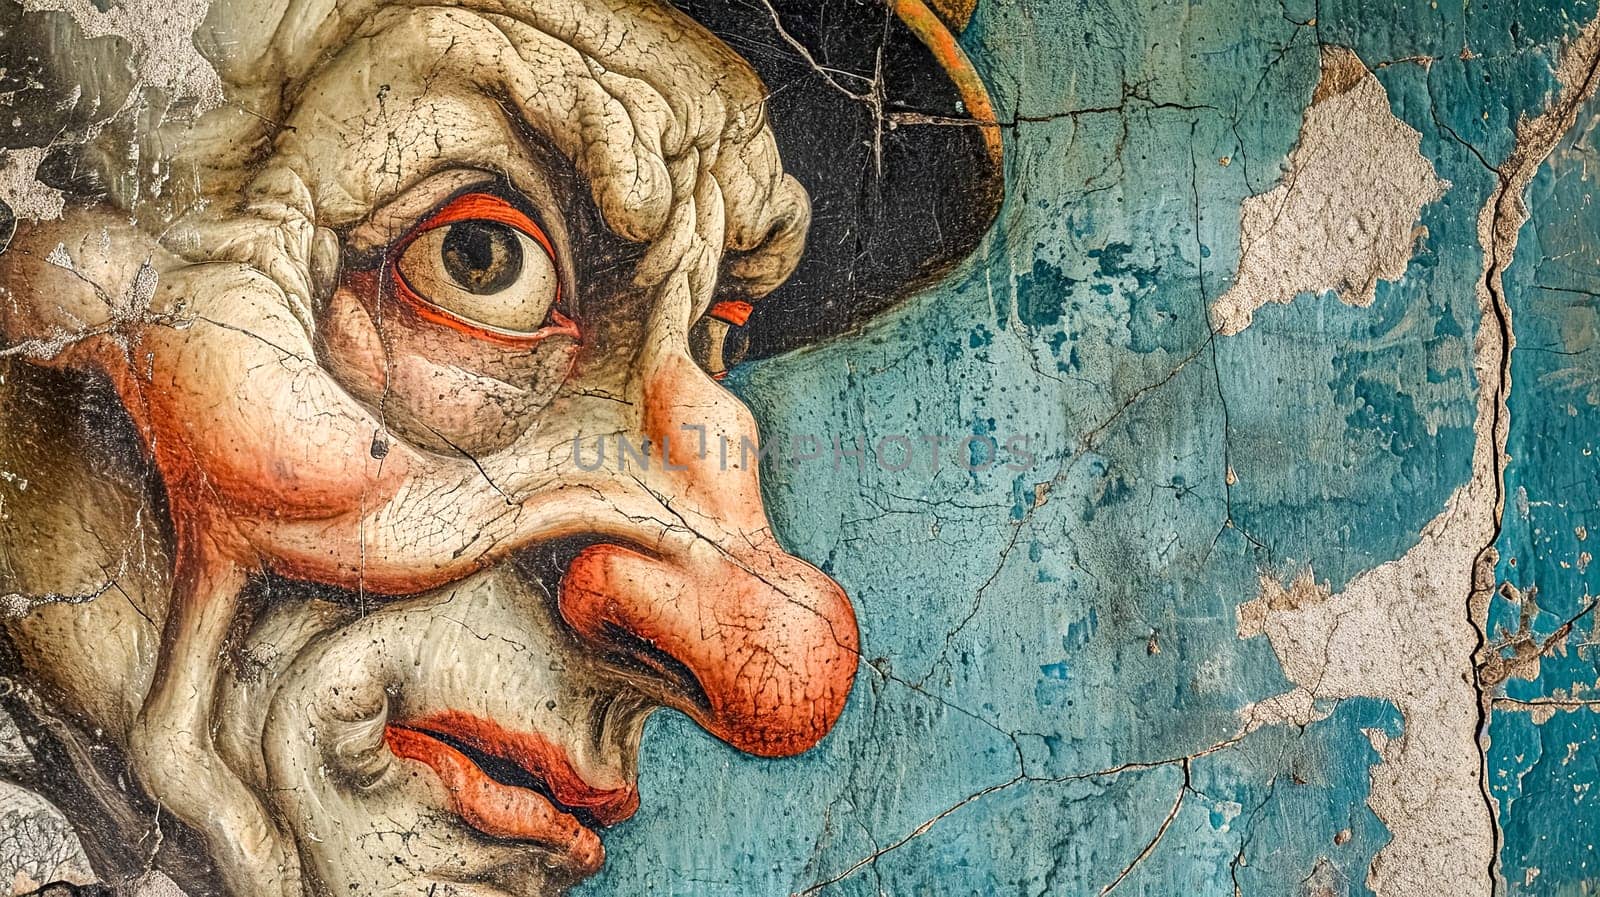 classical fresco depicting a whimsical character, showcasing the textured decay of renaissance art over time. by Edophoto